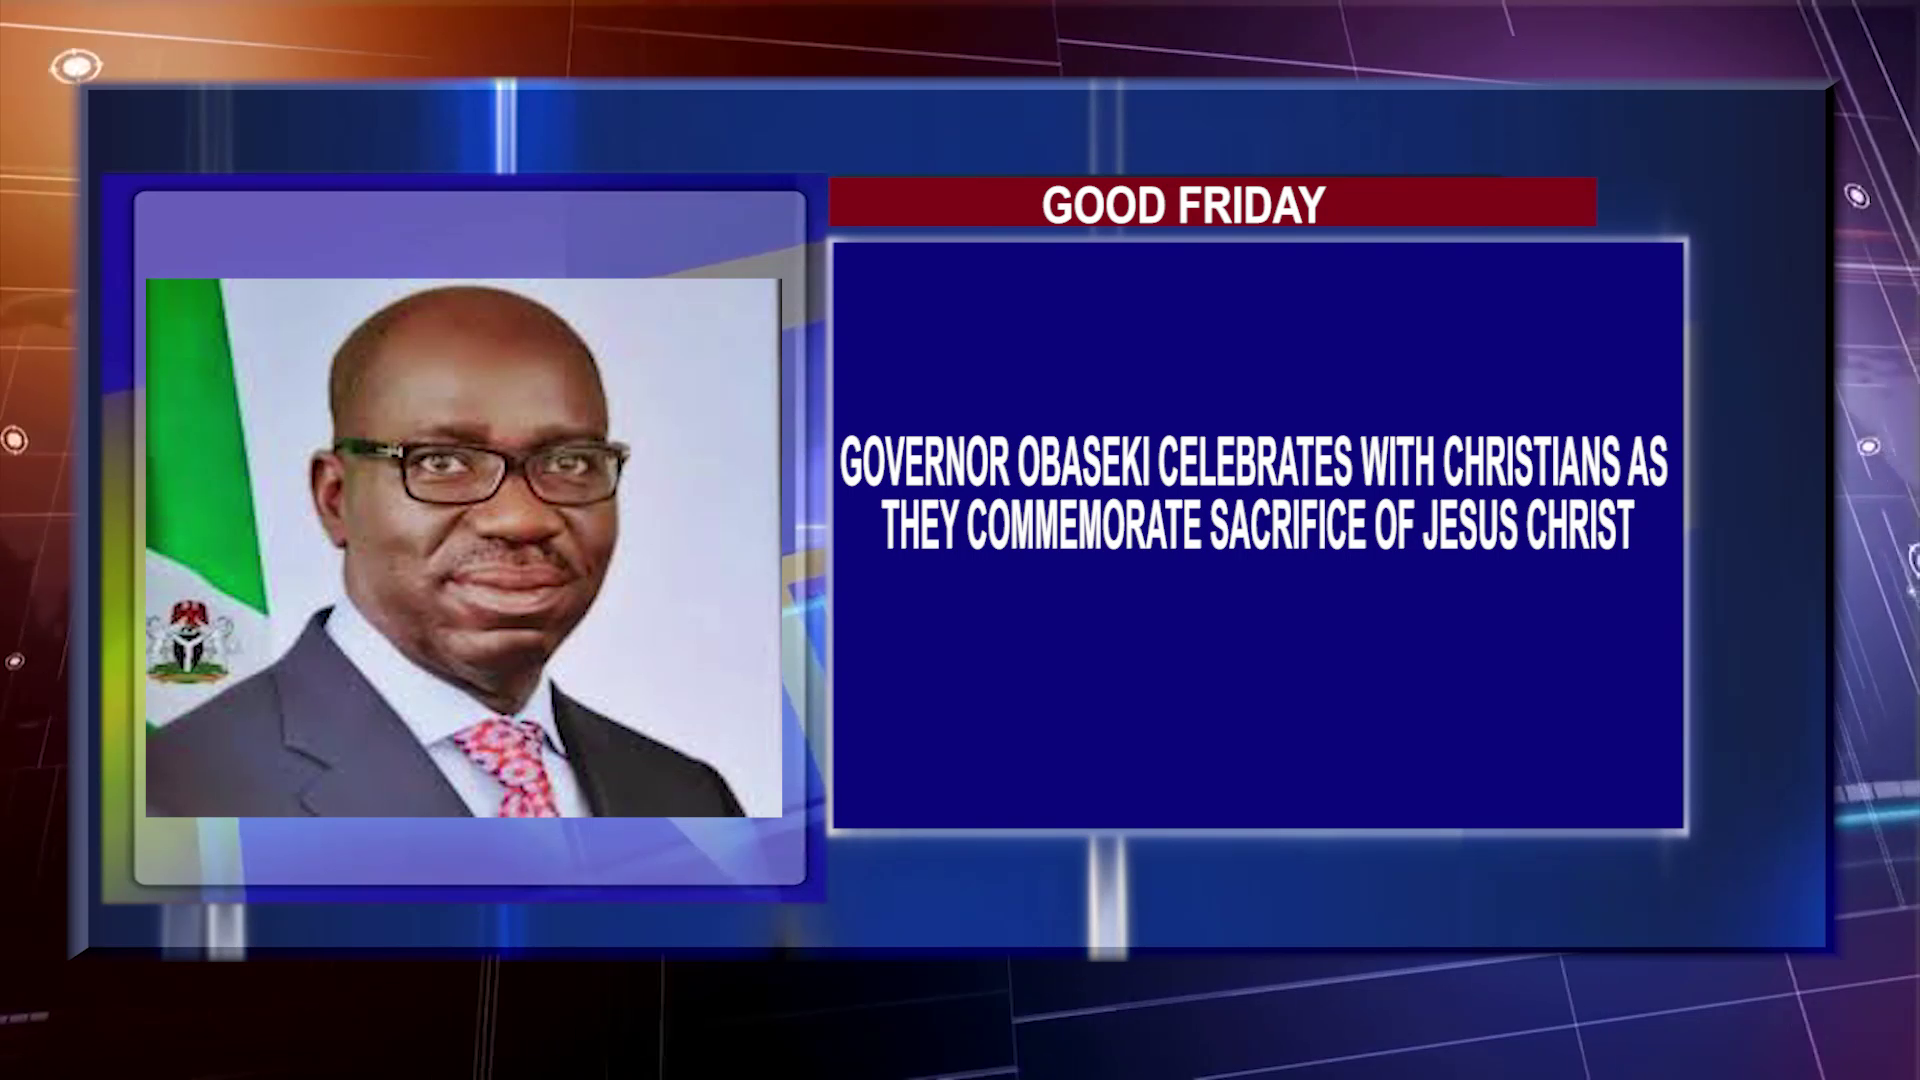 Governor Obaseki Celebrates With Christians As They Commemorate Sacrifice Of Jesus Christ